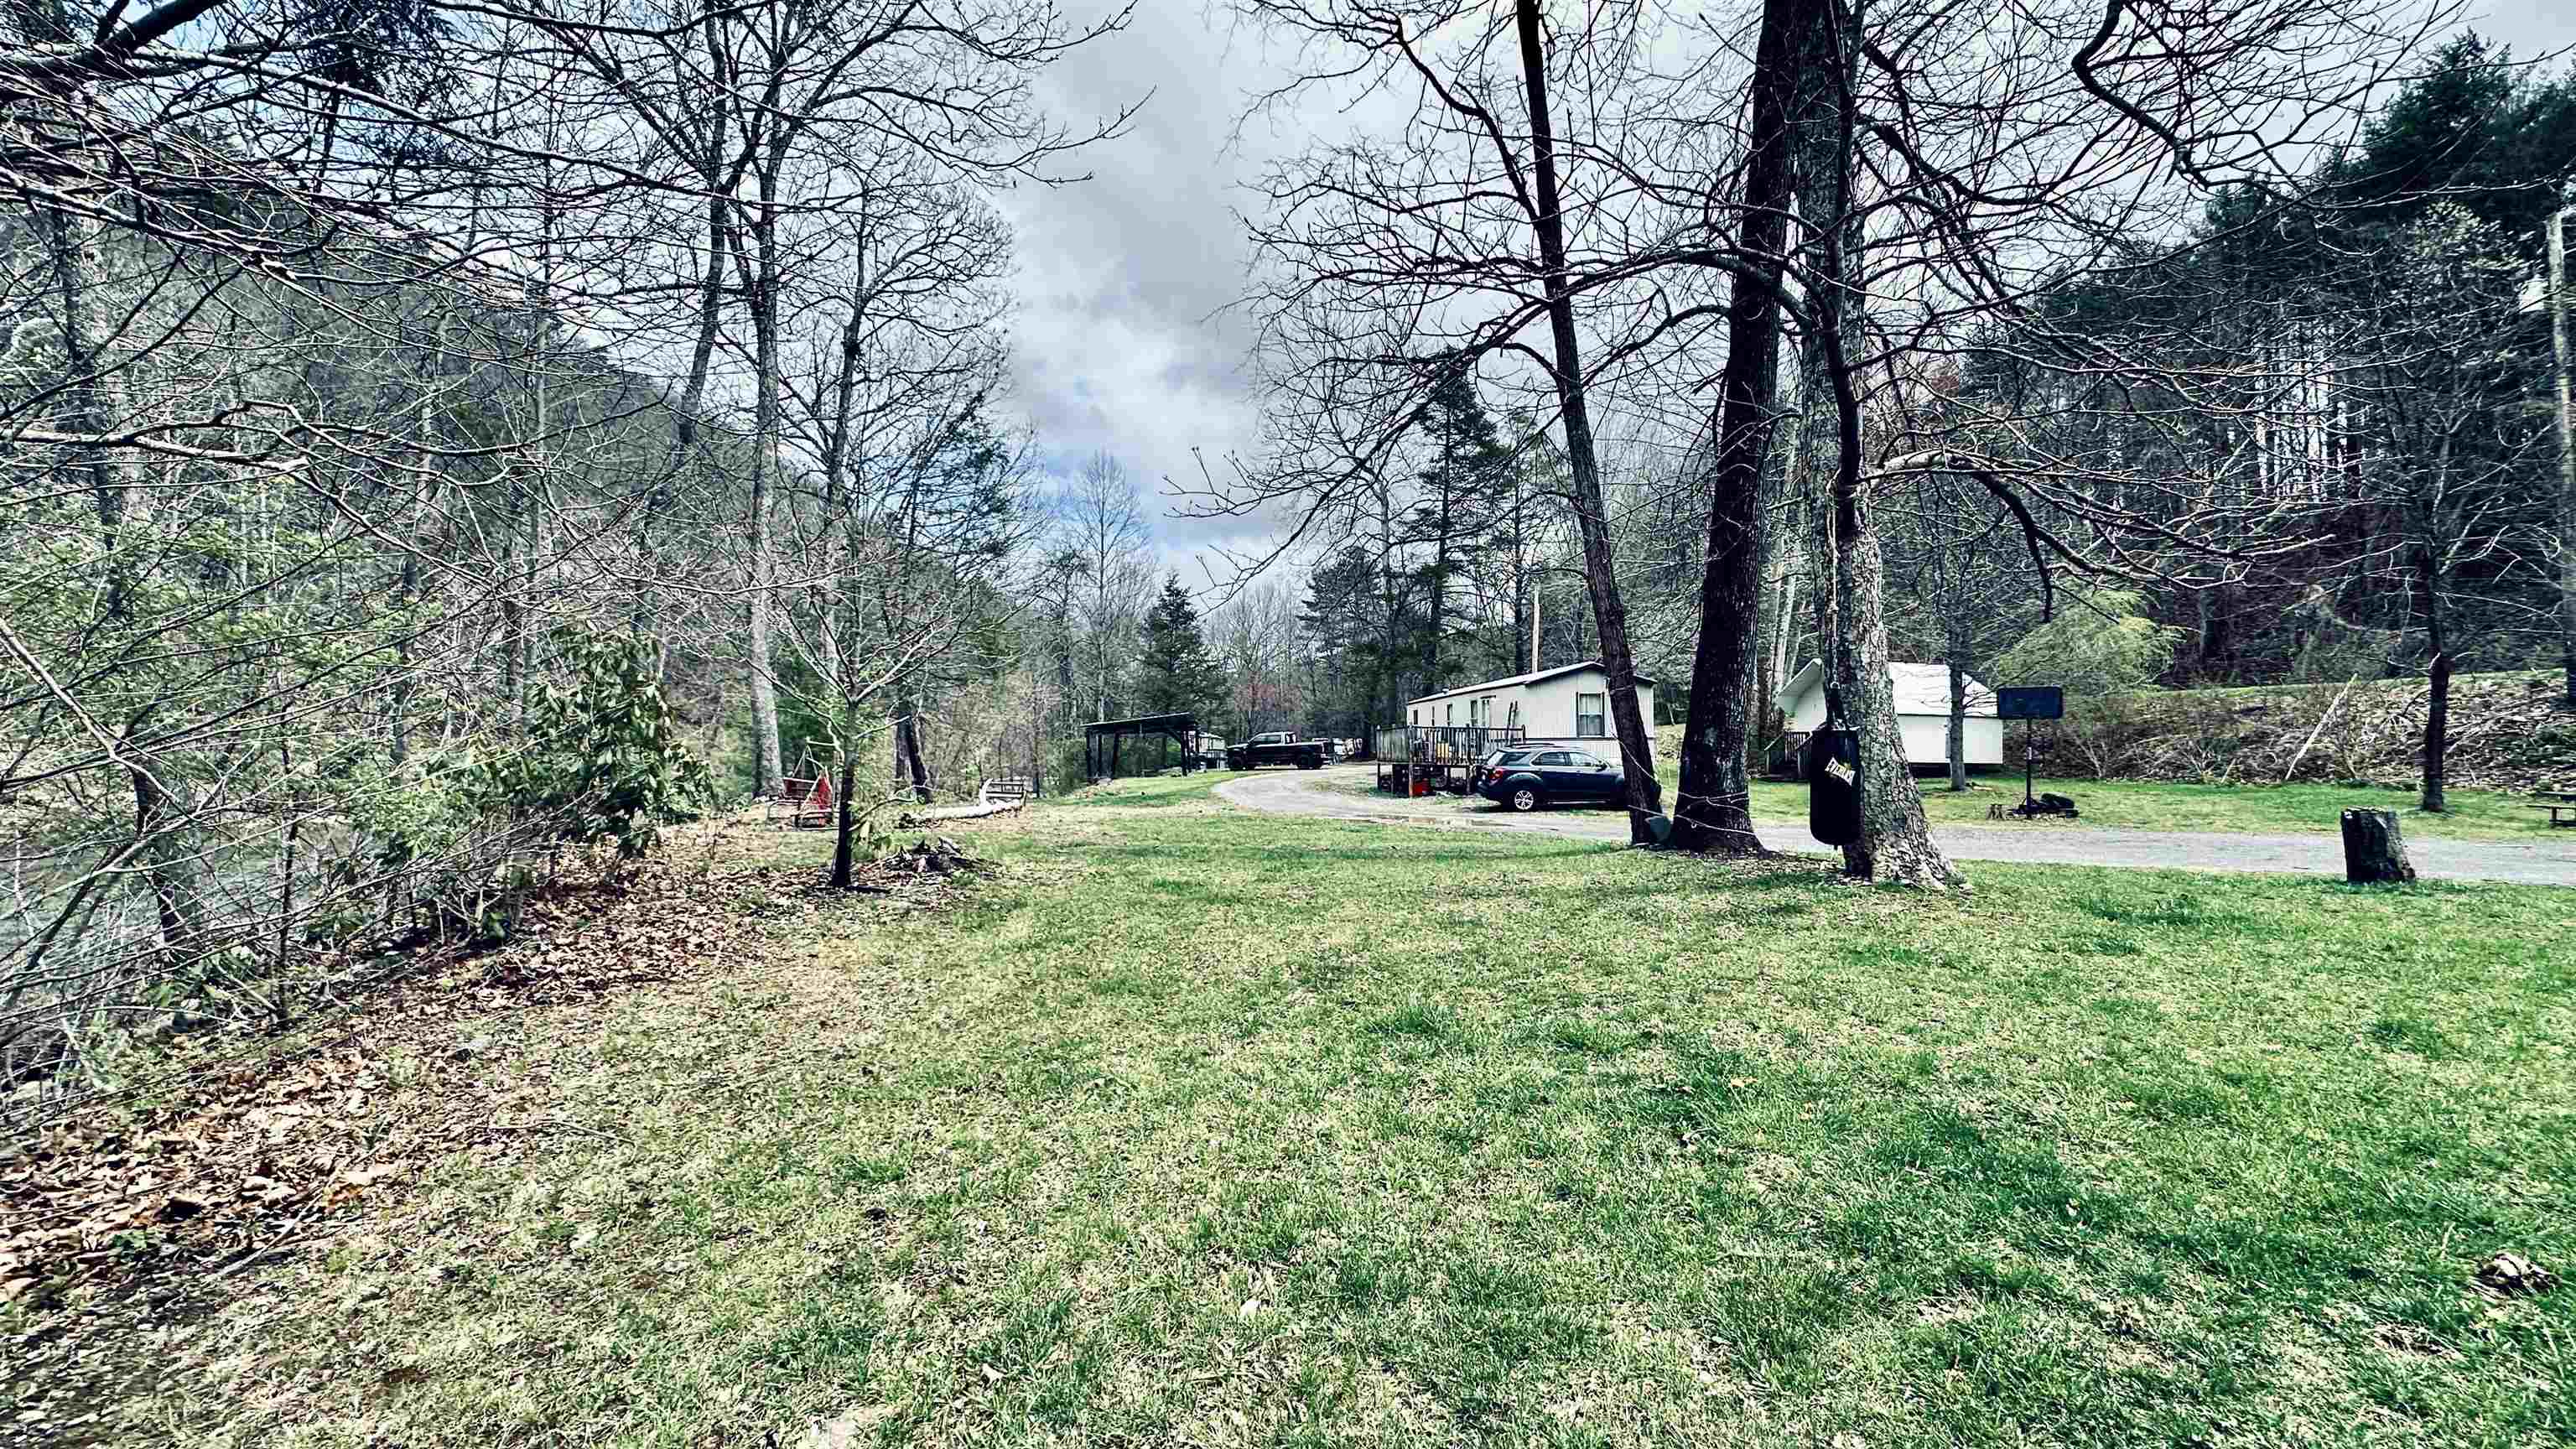 Investment property in Bland County. Three mobile homes on 2.5 acres with creek frontage. All three homes are currently rented.